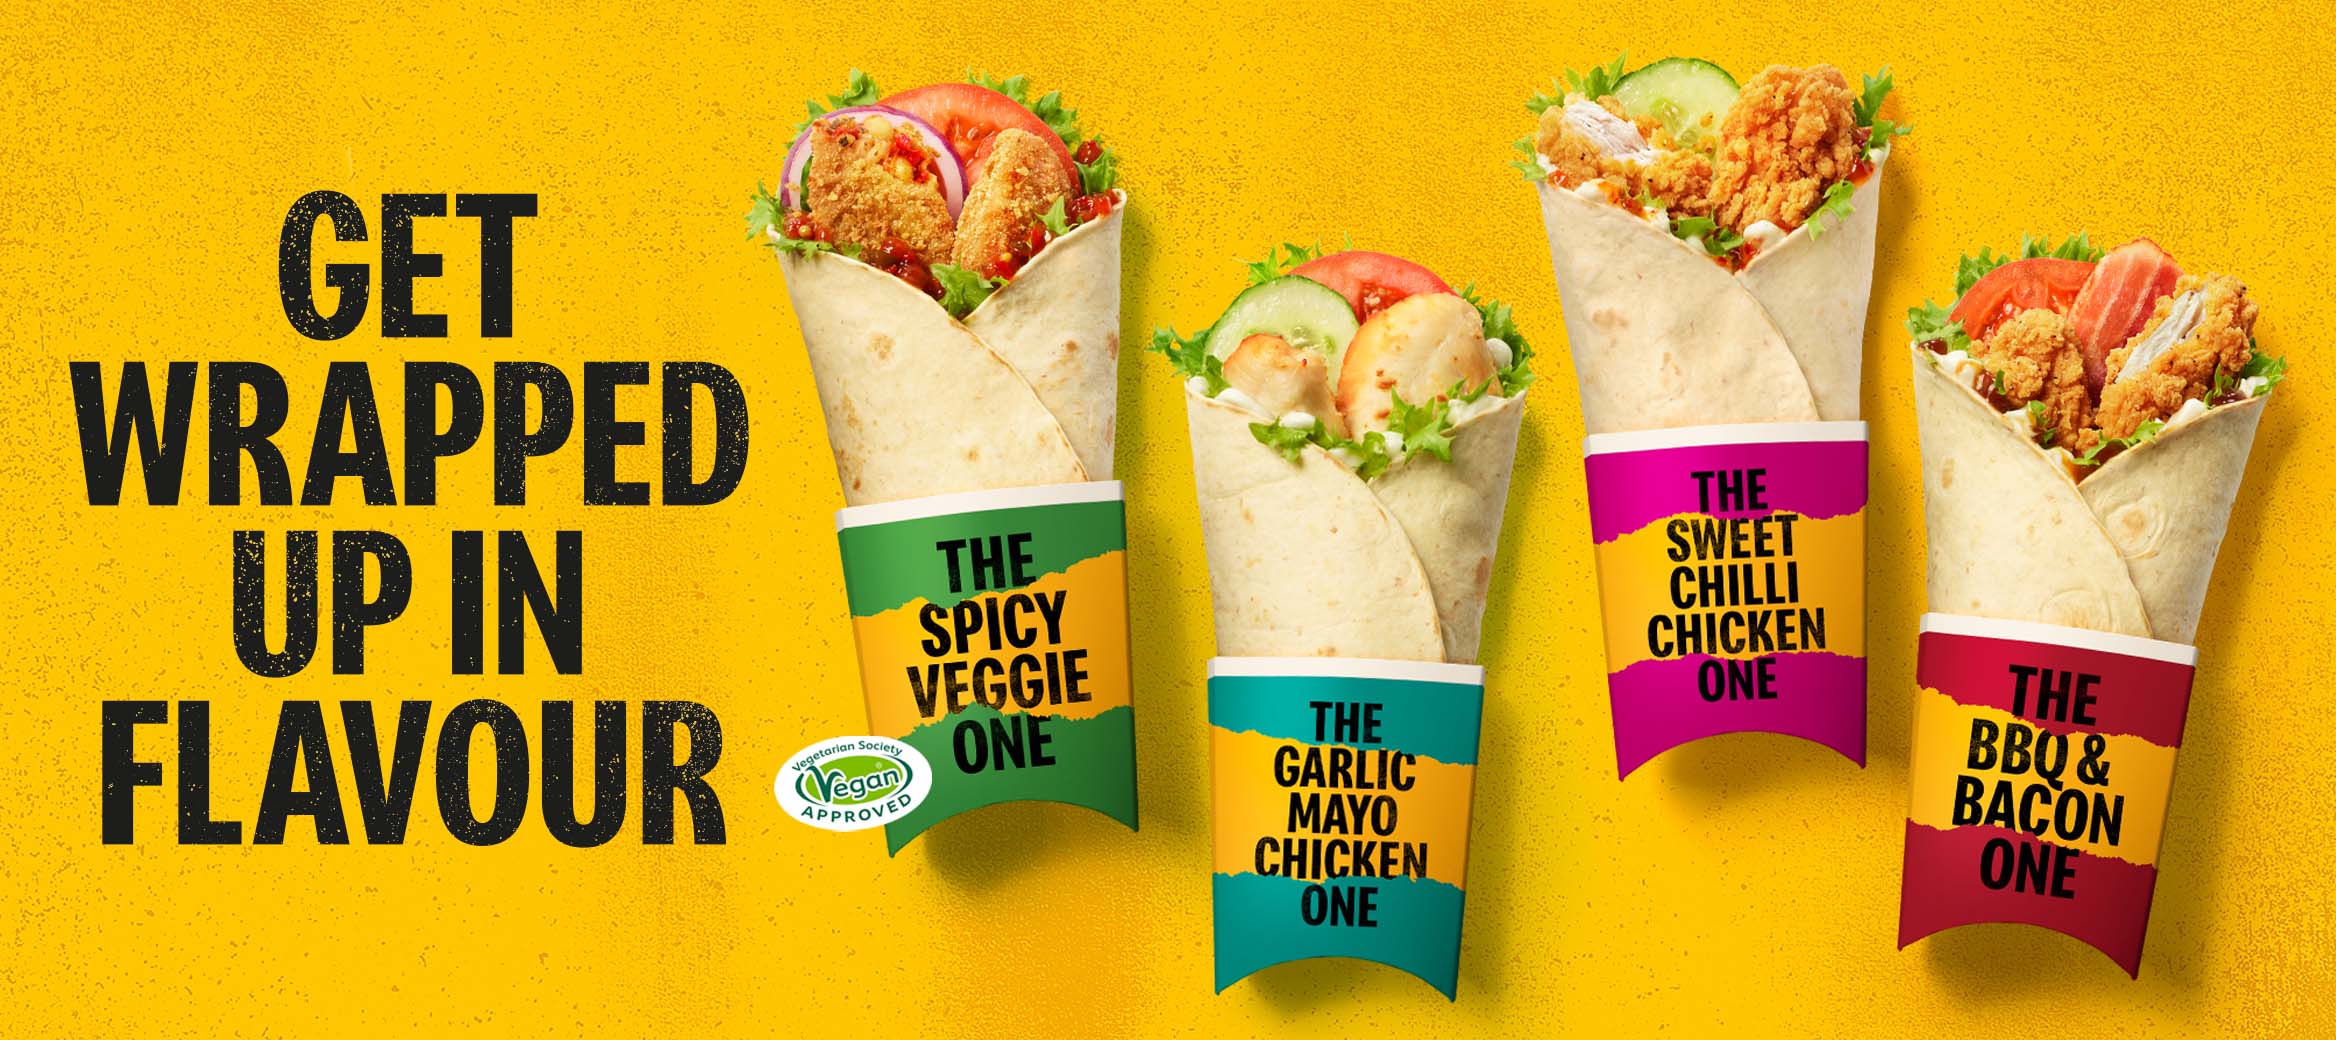 Get Wrapped up in Flavour